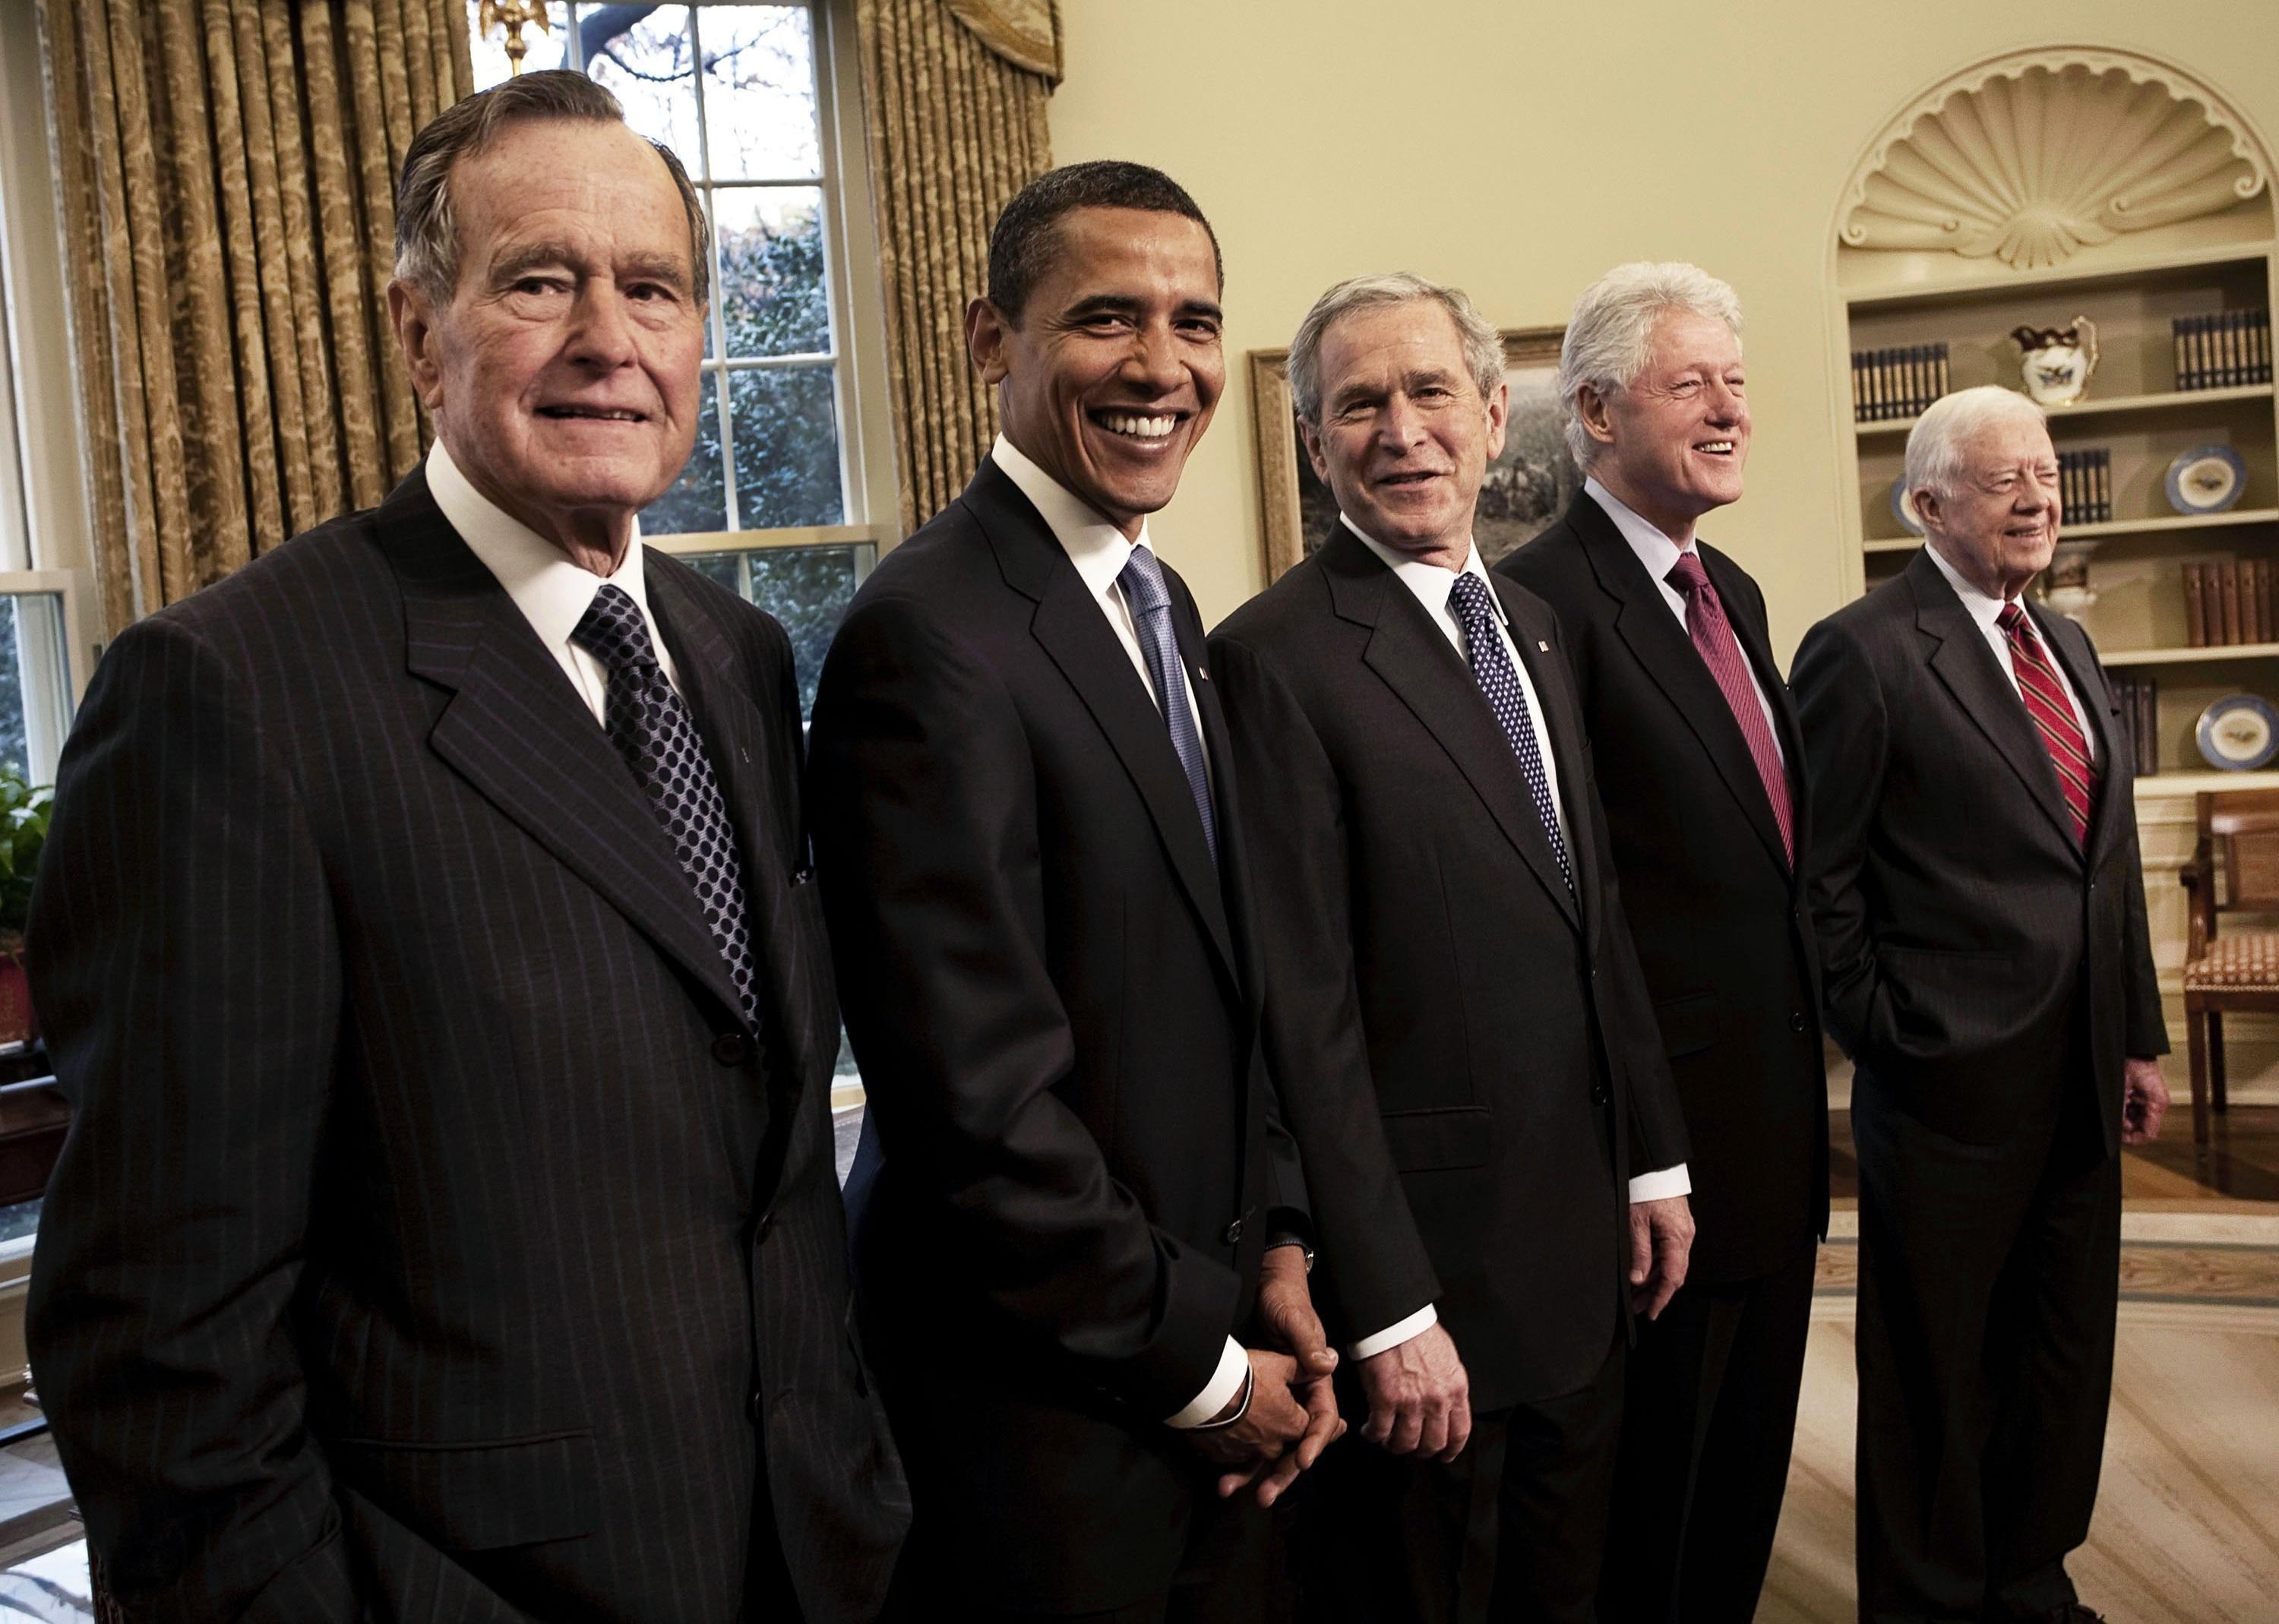 George Bush, Barack Obama,George W. Bush,Bill Clinton and Jimmy Carter standing in a line in the Oval Office at the White House.